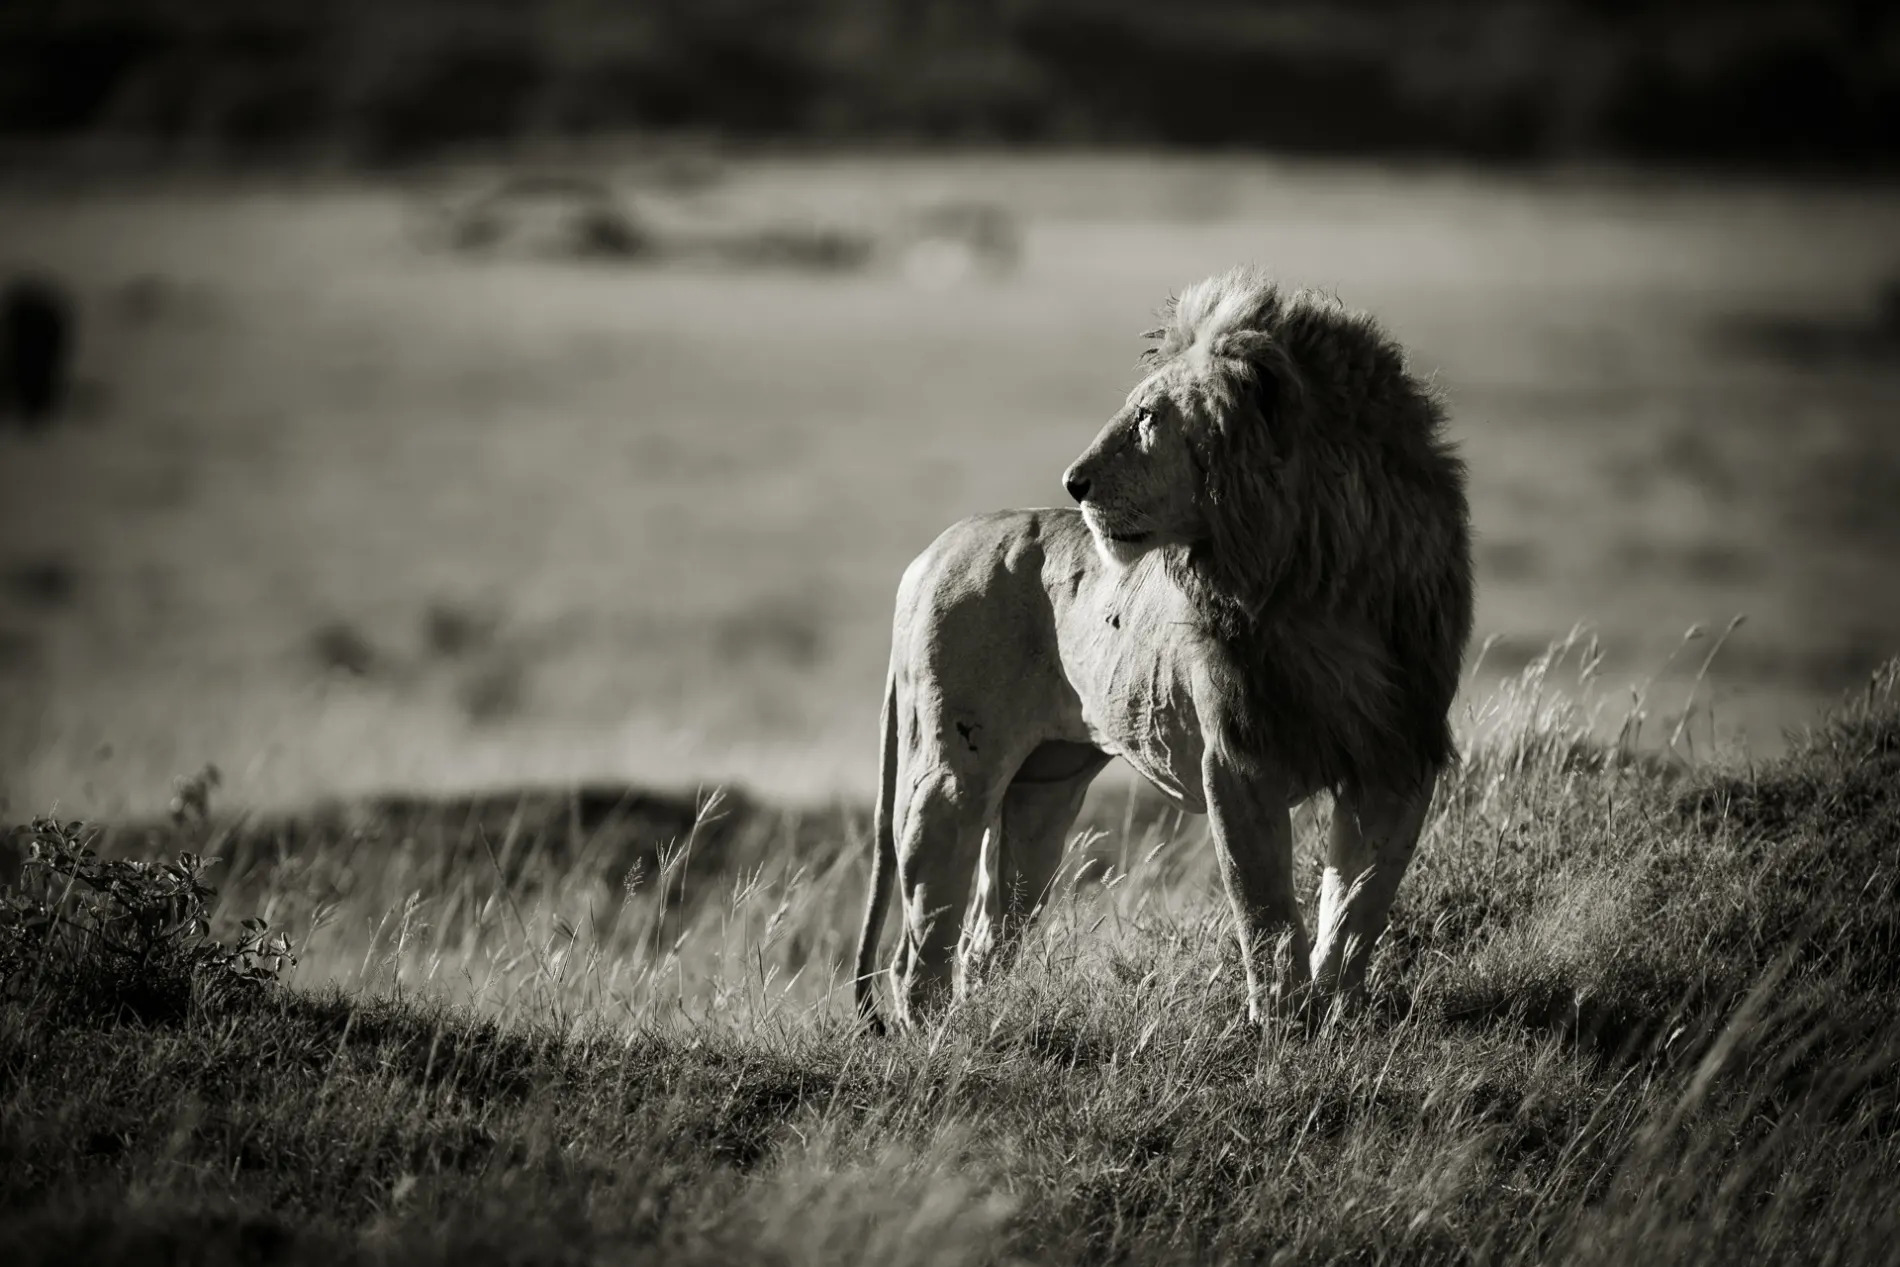 Lion black and white